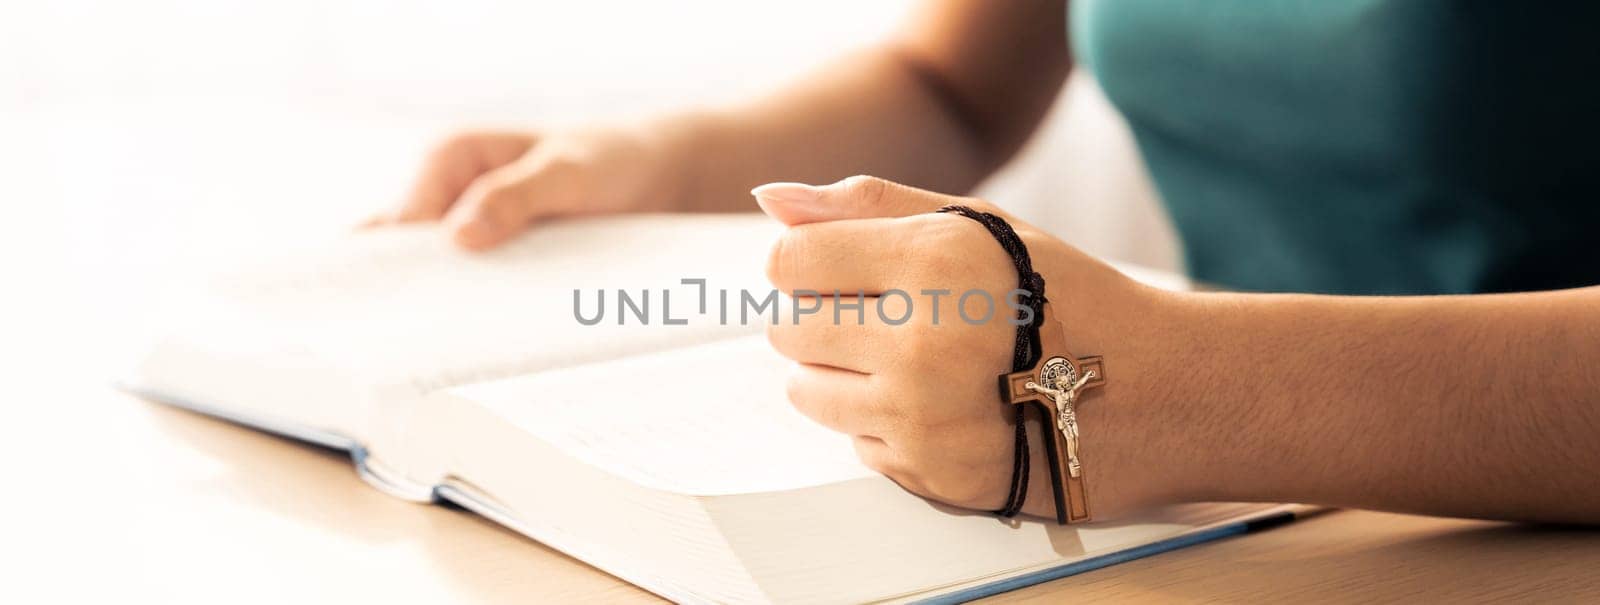 Cropped image of female reading a bible book while holding cross at wooden table with blurring background. Concept of hope, religion, faith, christianity and god blessing. Warm. Burgeoning.